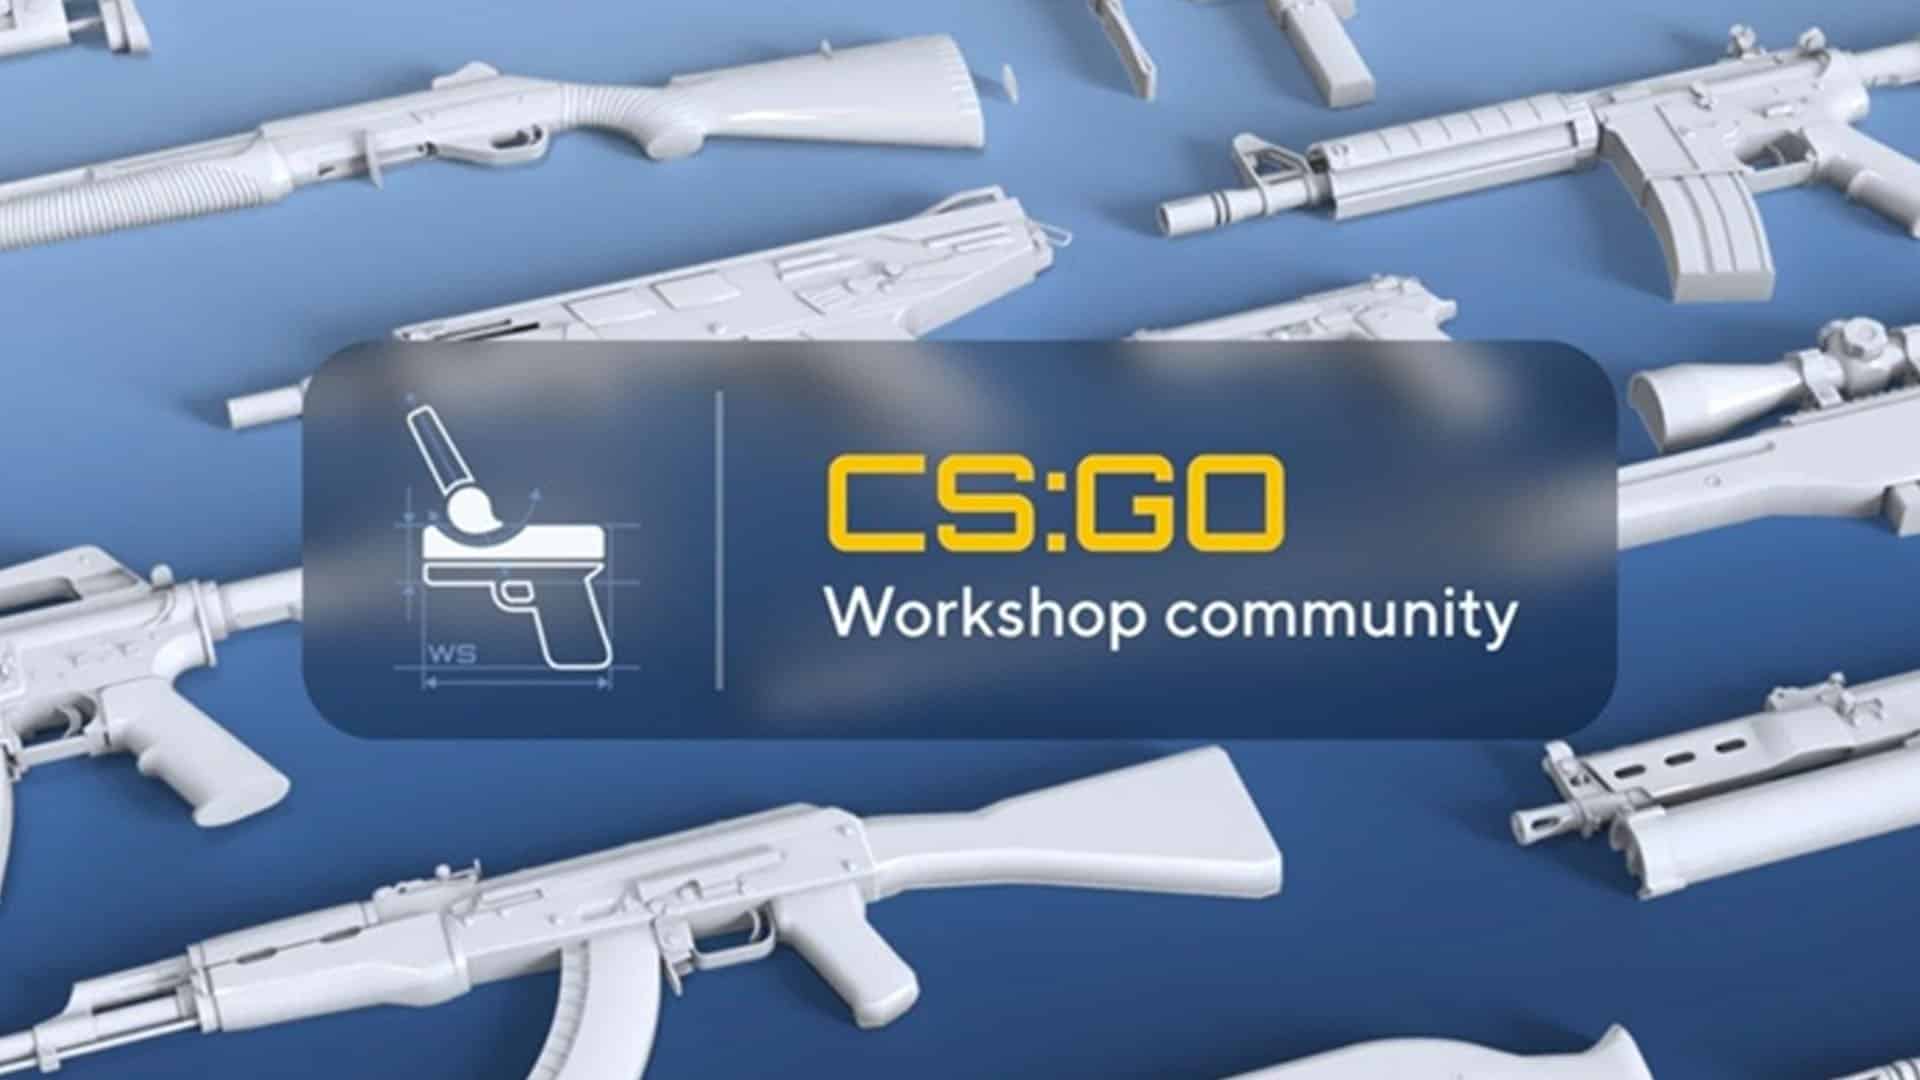 CS:GO Workshop: What is It And How Can I Use It?